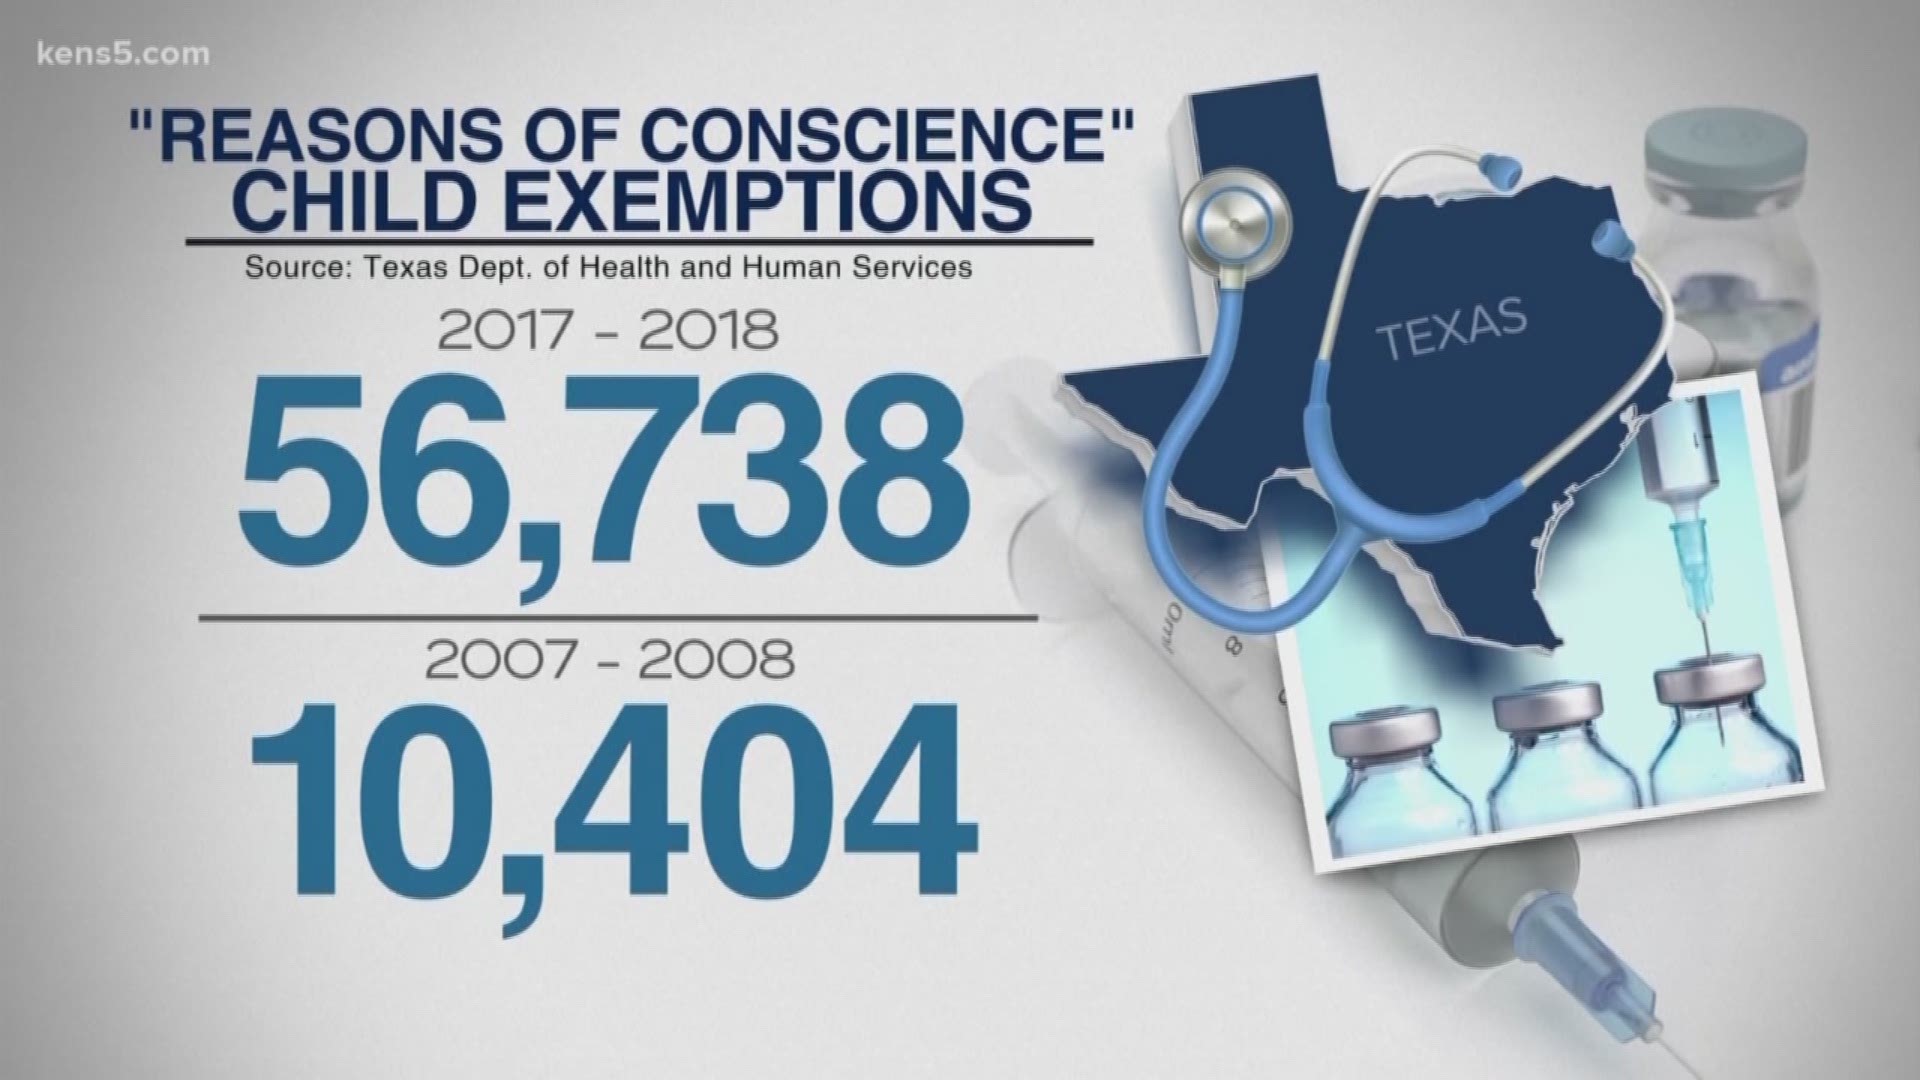 Texas has more than 56,000 children with non-medical vaccination exemptions for "reasons of conscience."